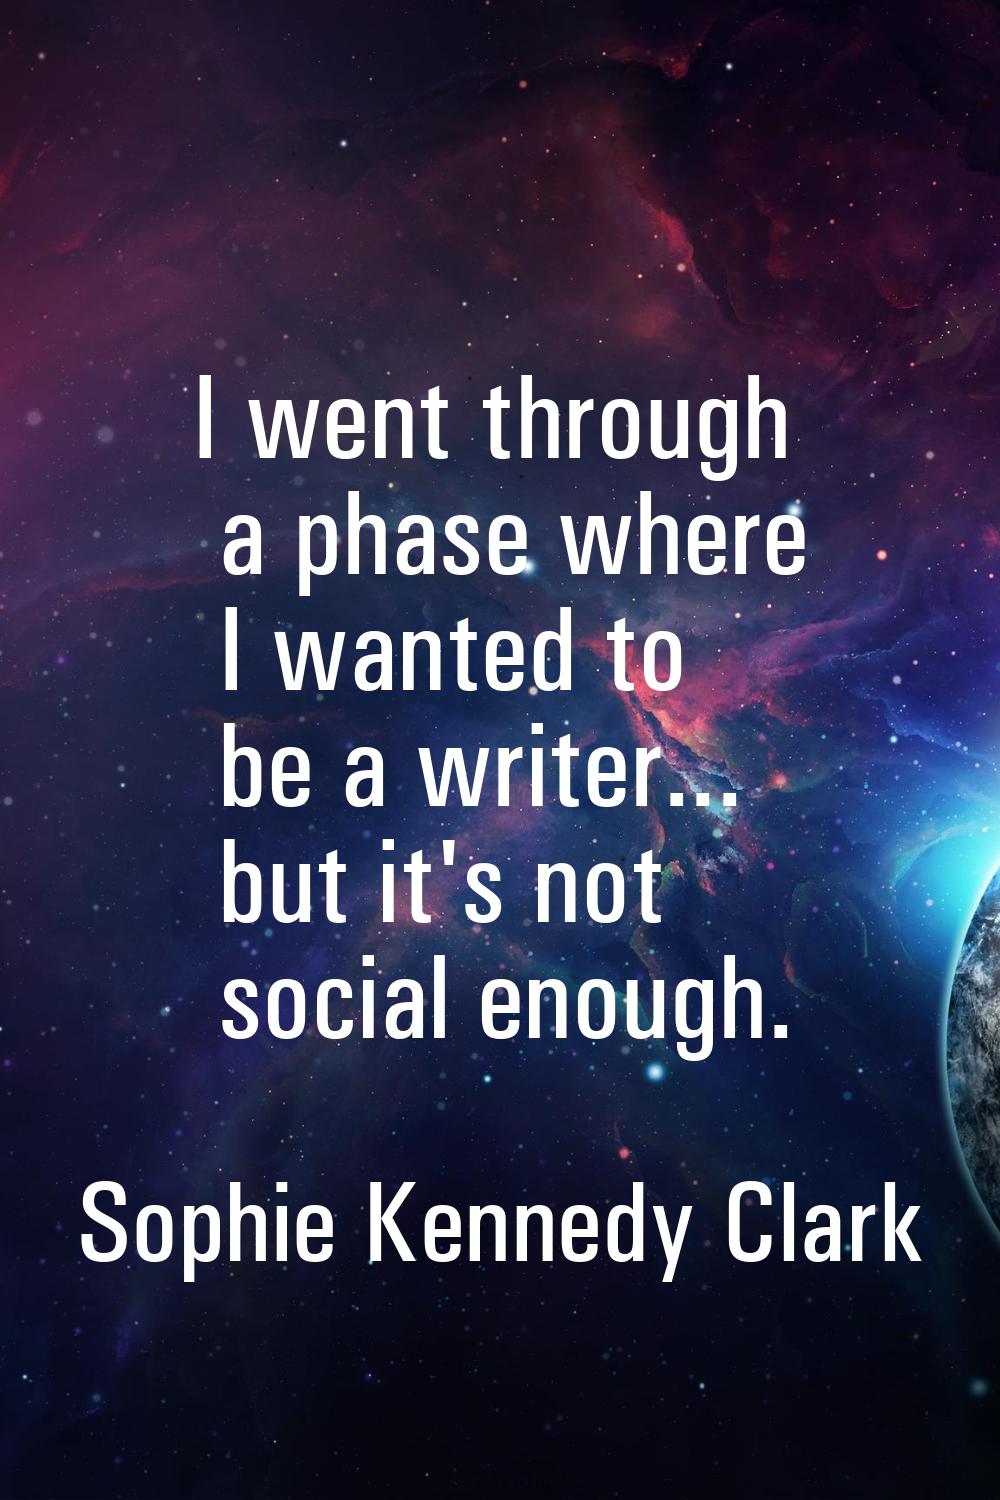 I went through a phase where I wanted to be a writer... but it's not social enough.